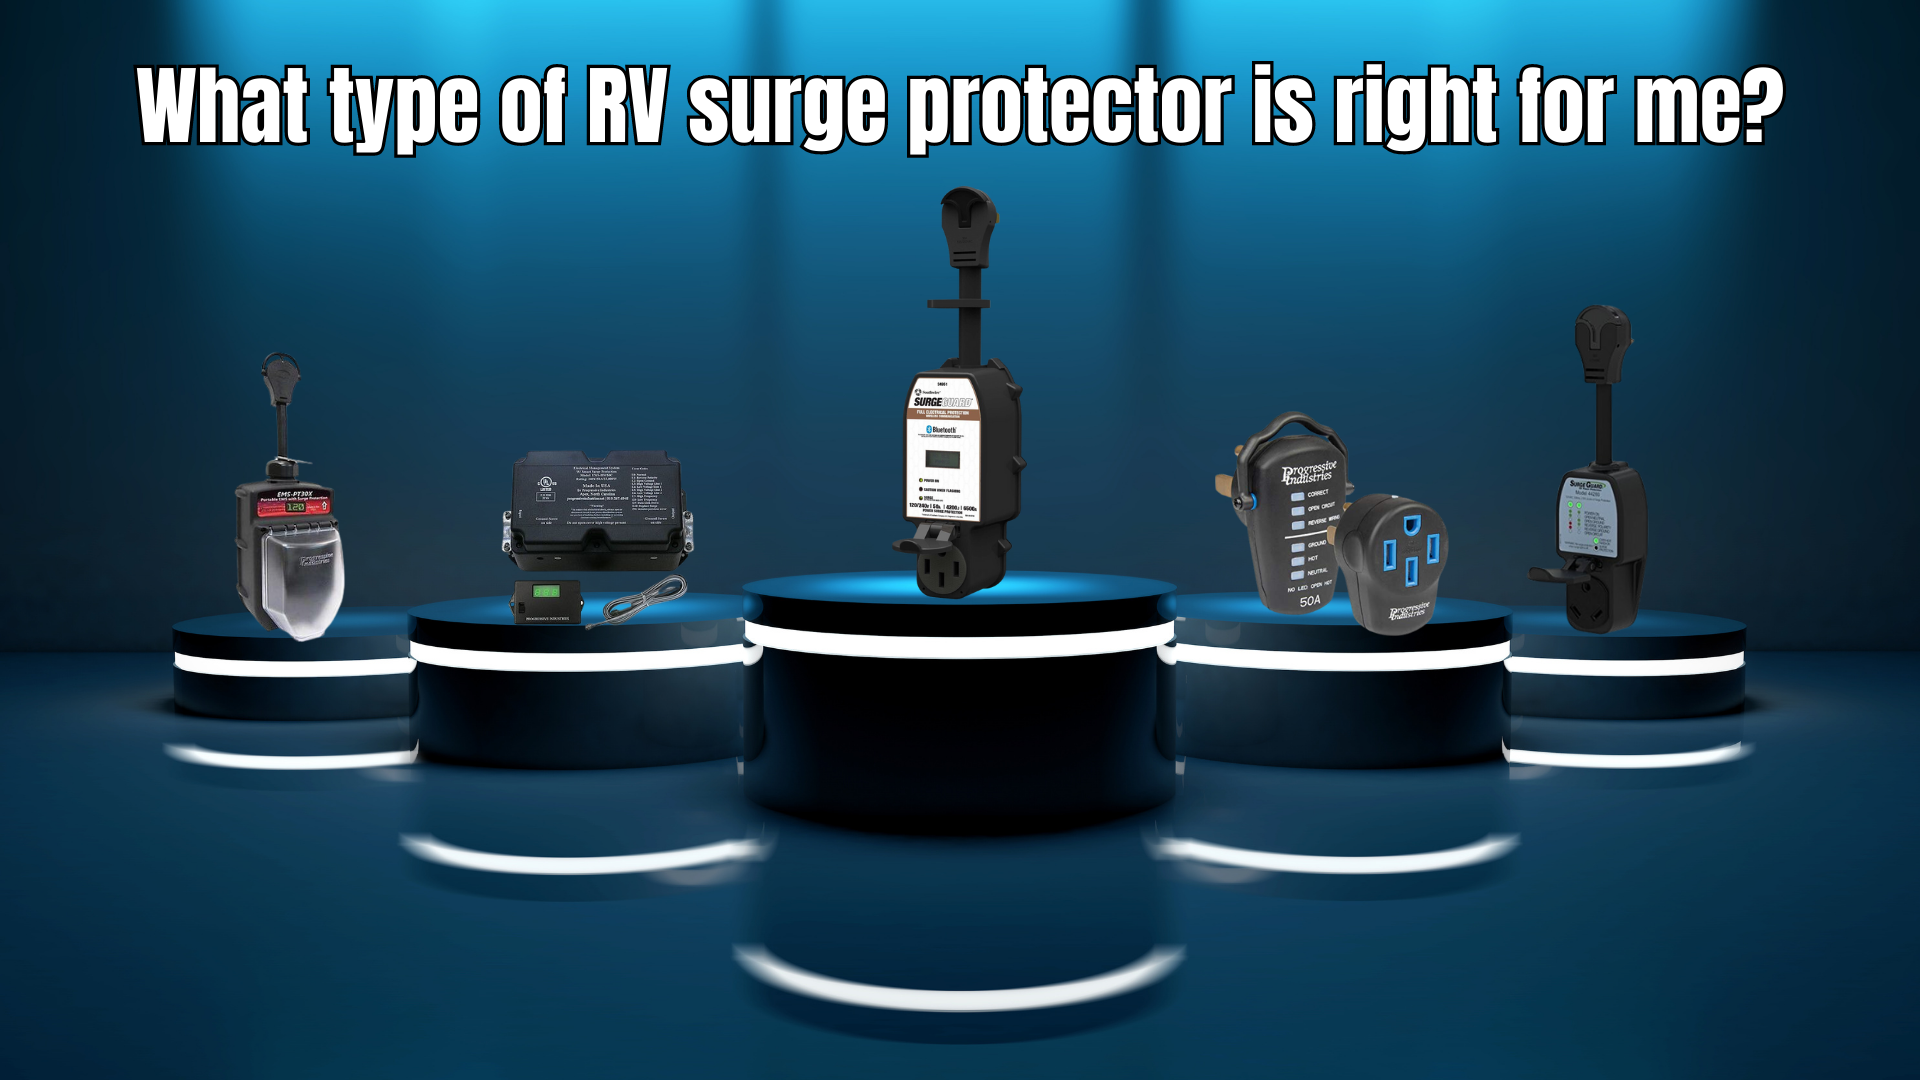 What type of RV surge protector is right for me?